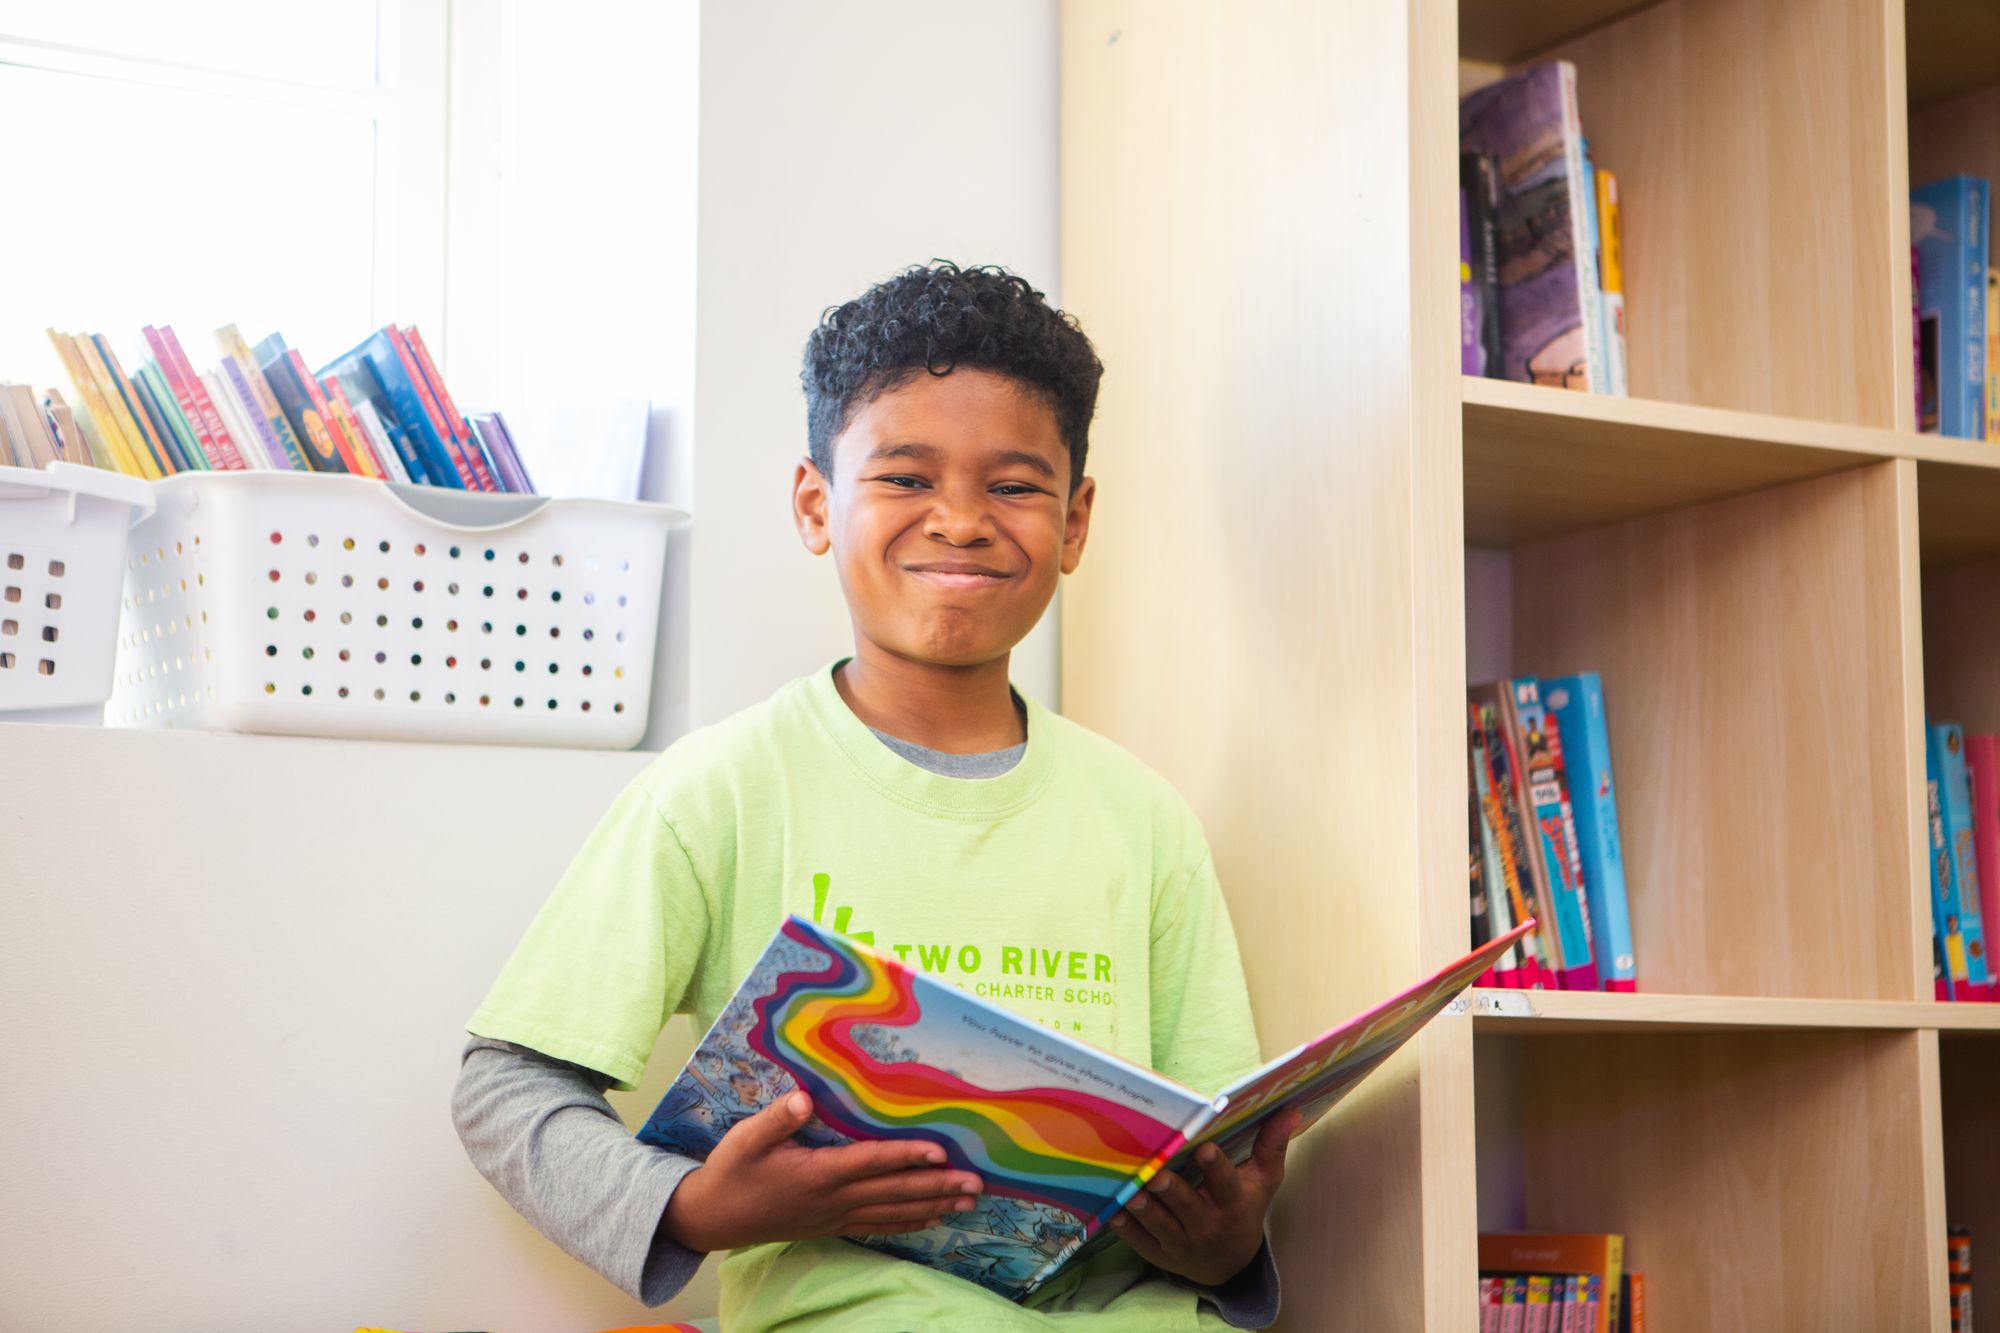 Boy smiles while reading a book with a colorful cover. 